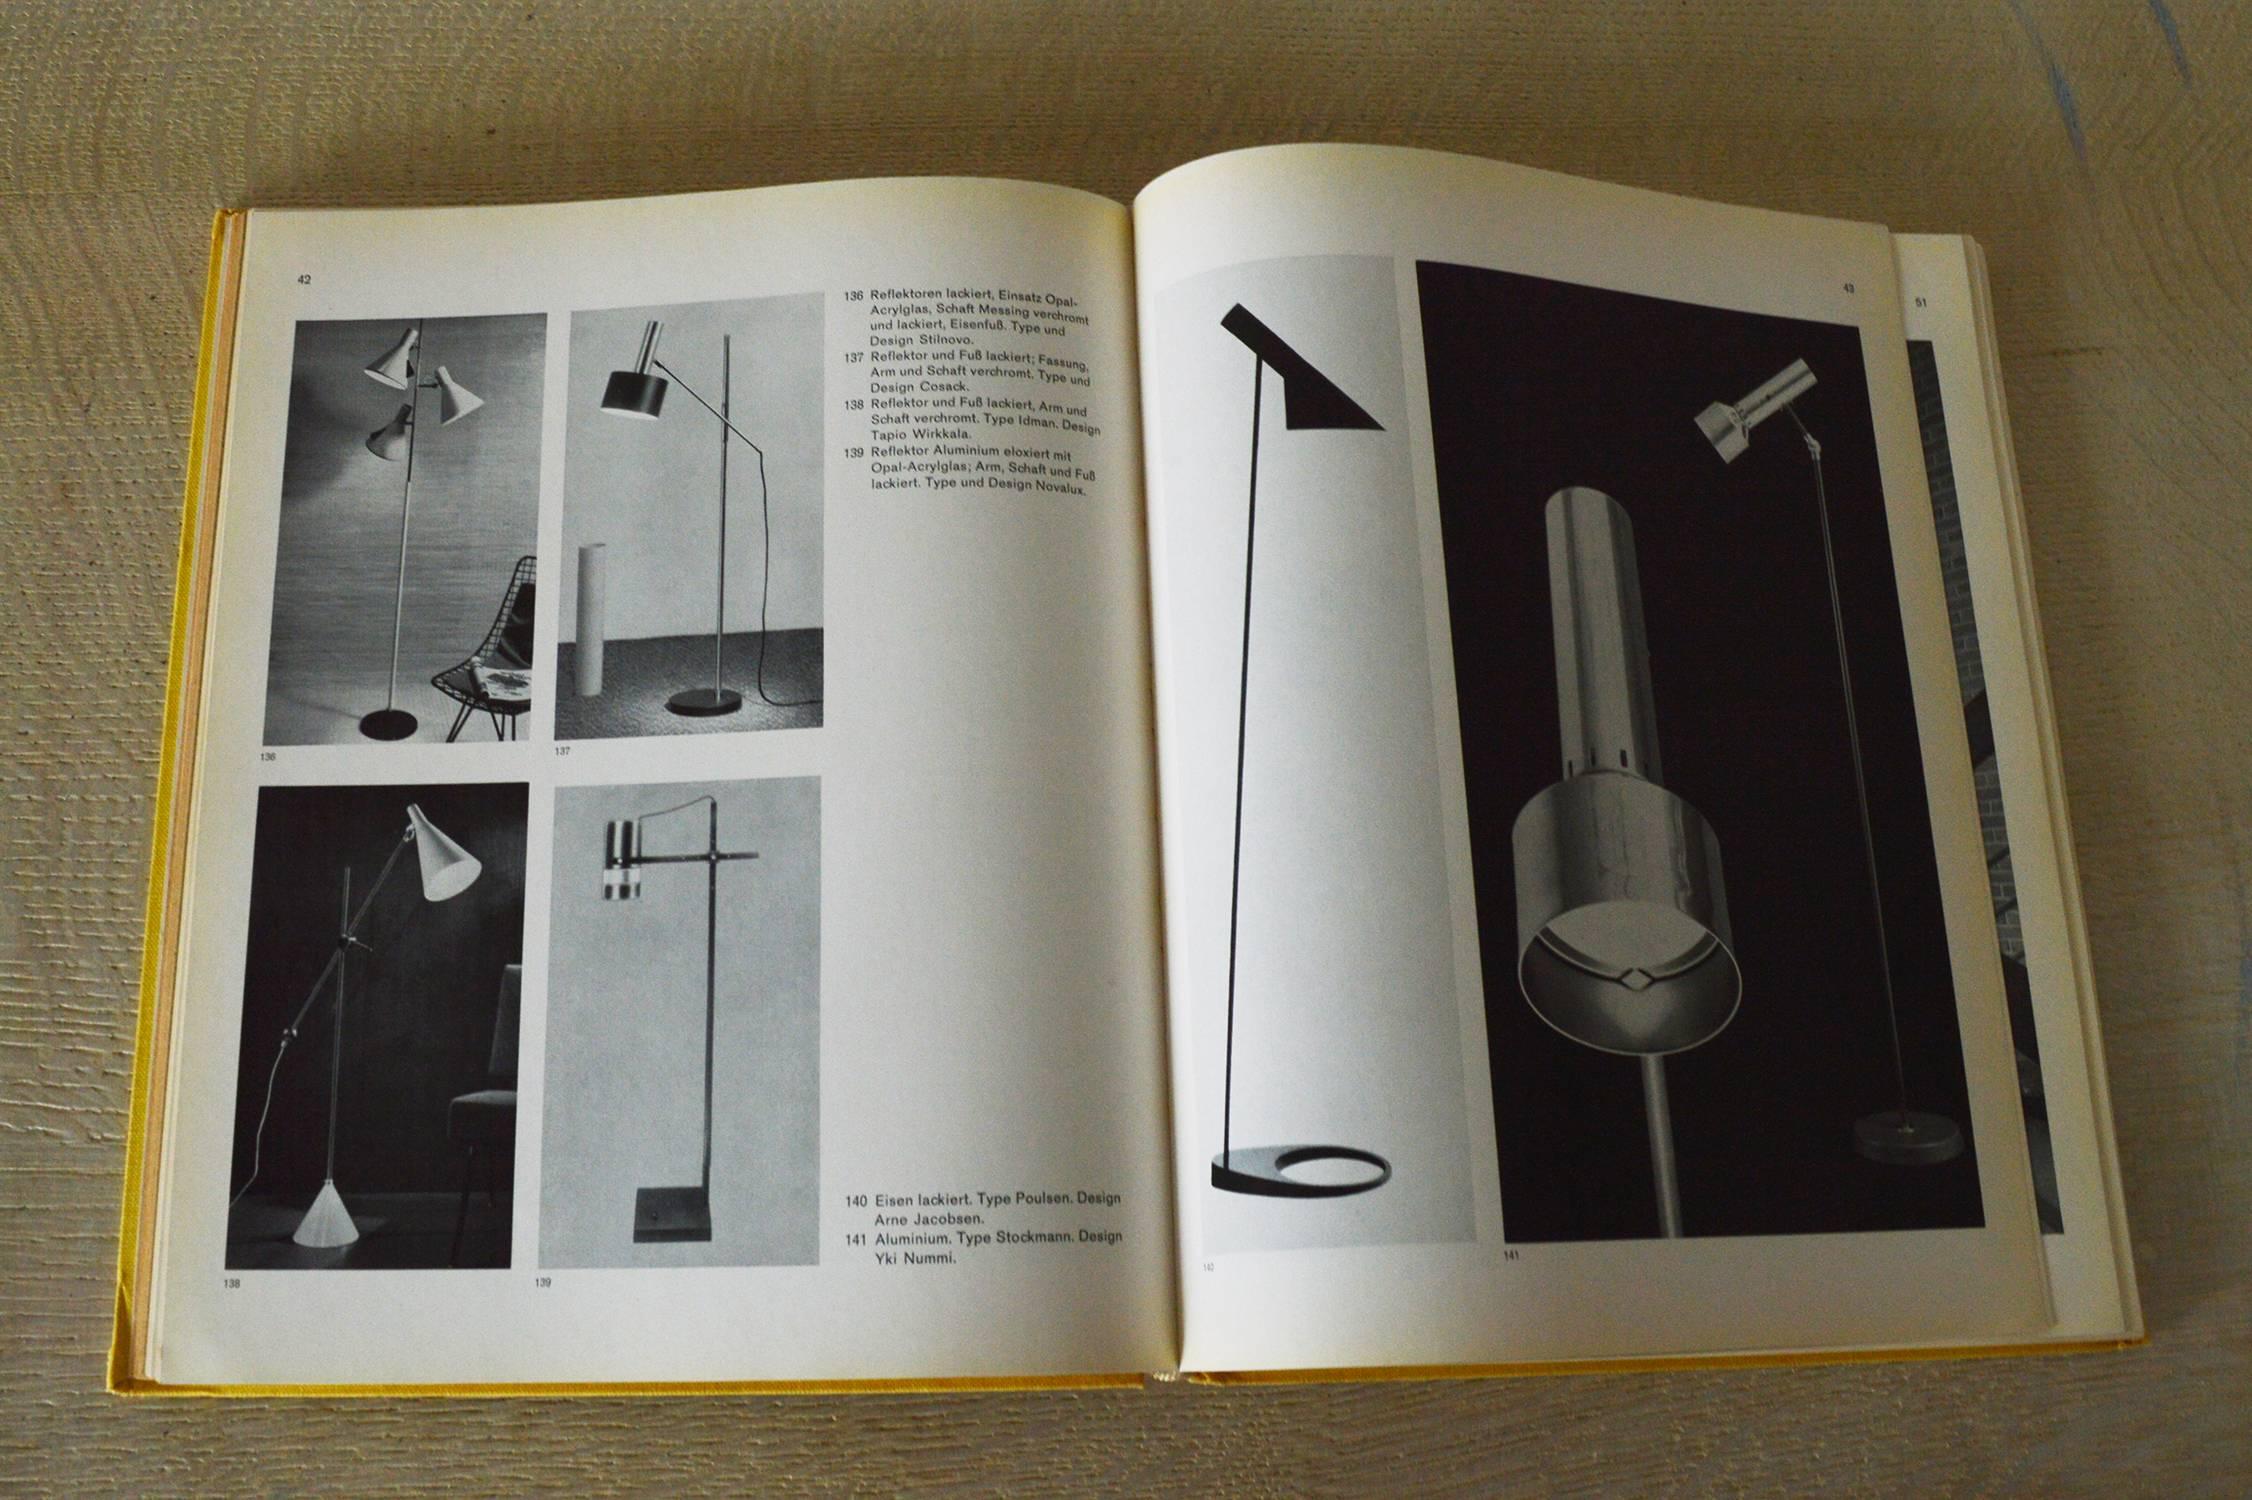 Paper Mid-Century Lamps and Lighting Reference Book, 1962